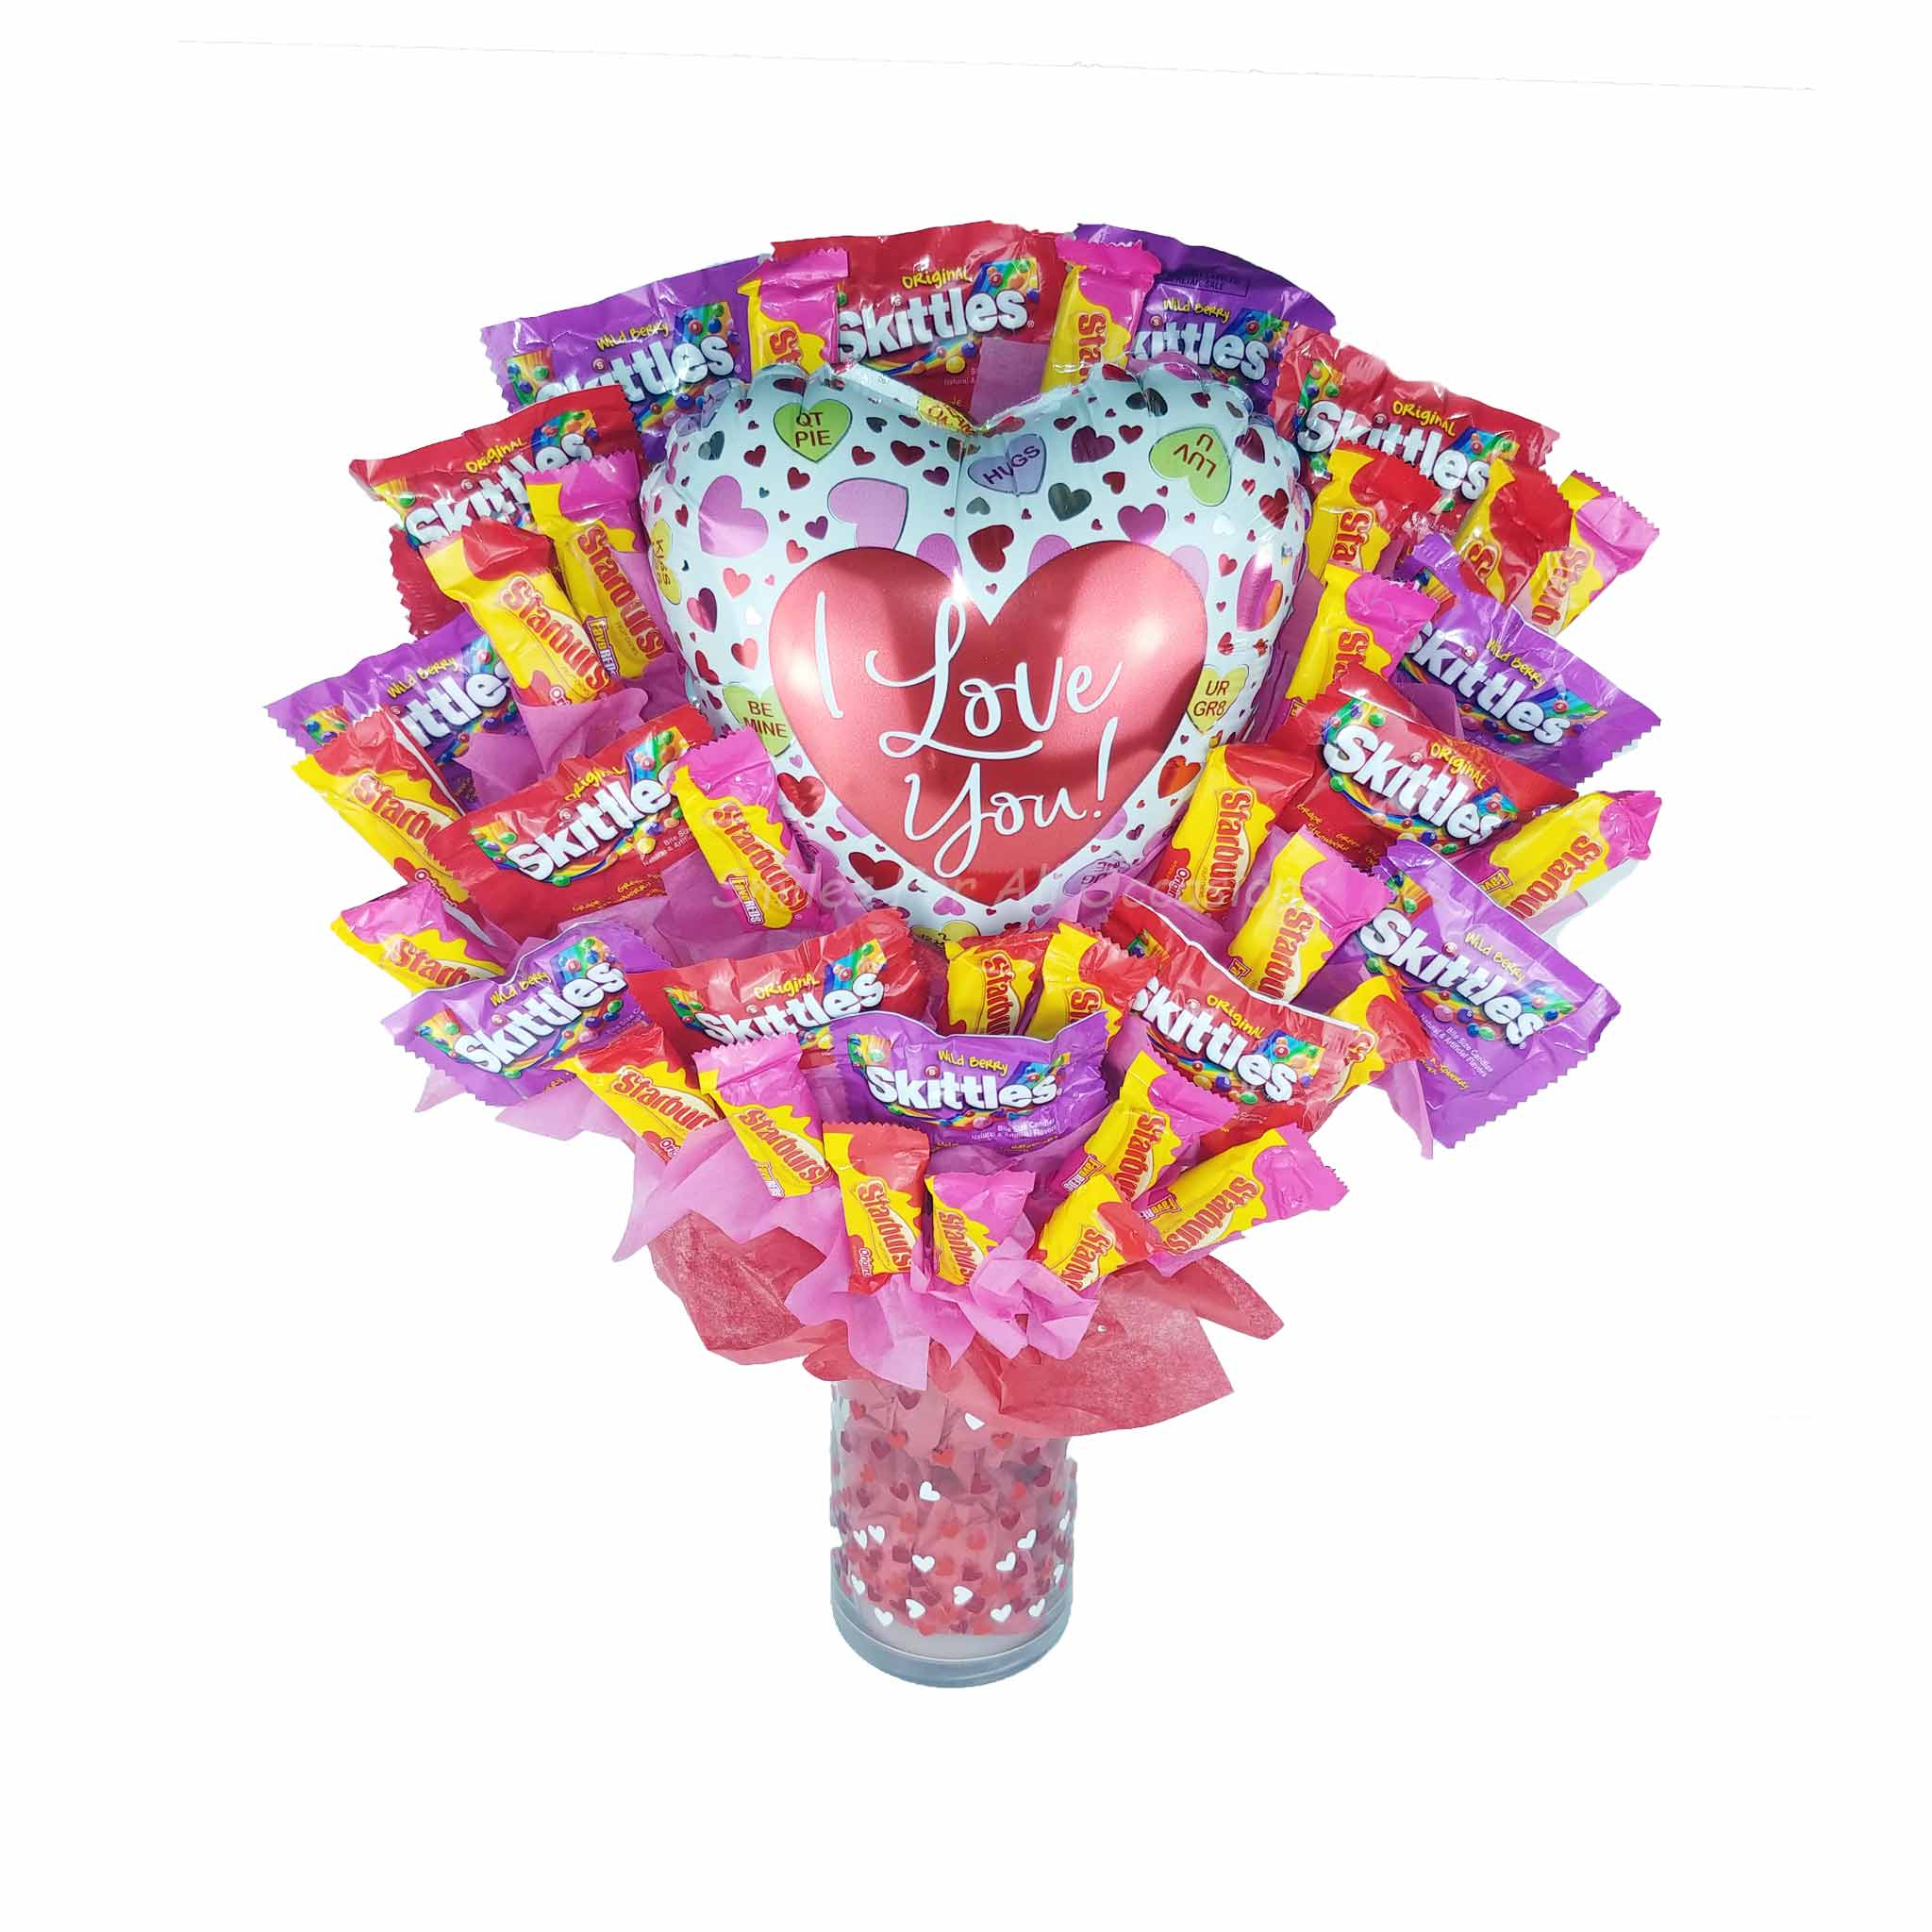 Skittles and Starburst Candy Bouquet